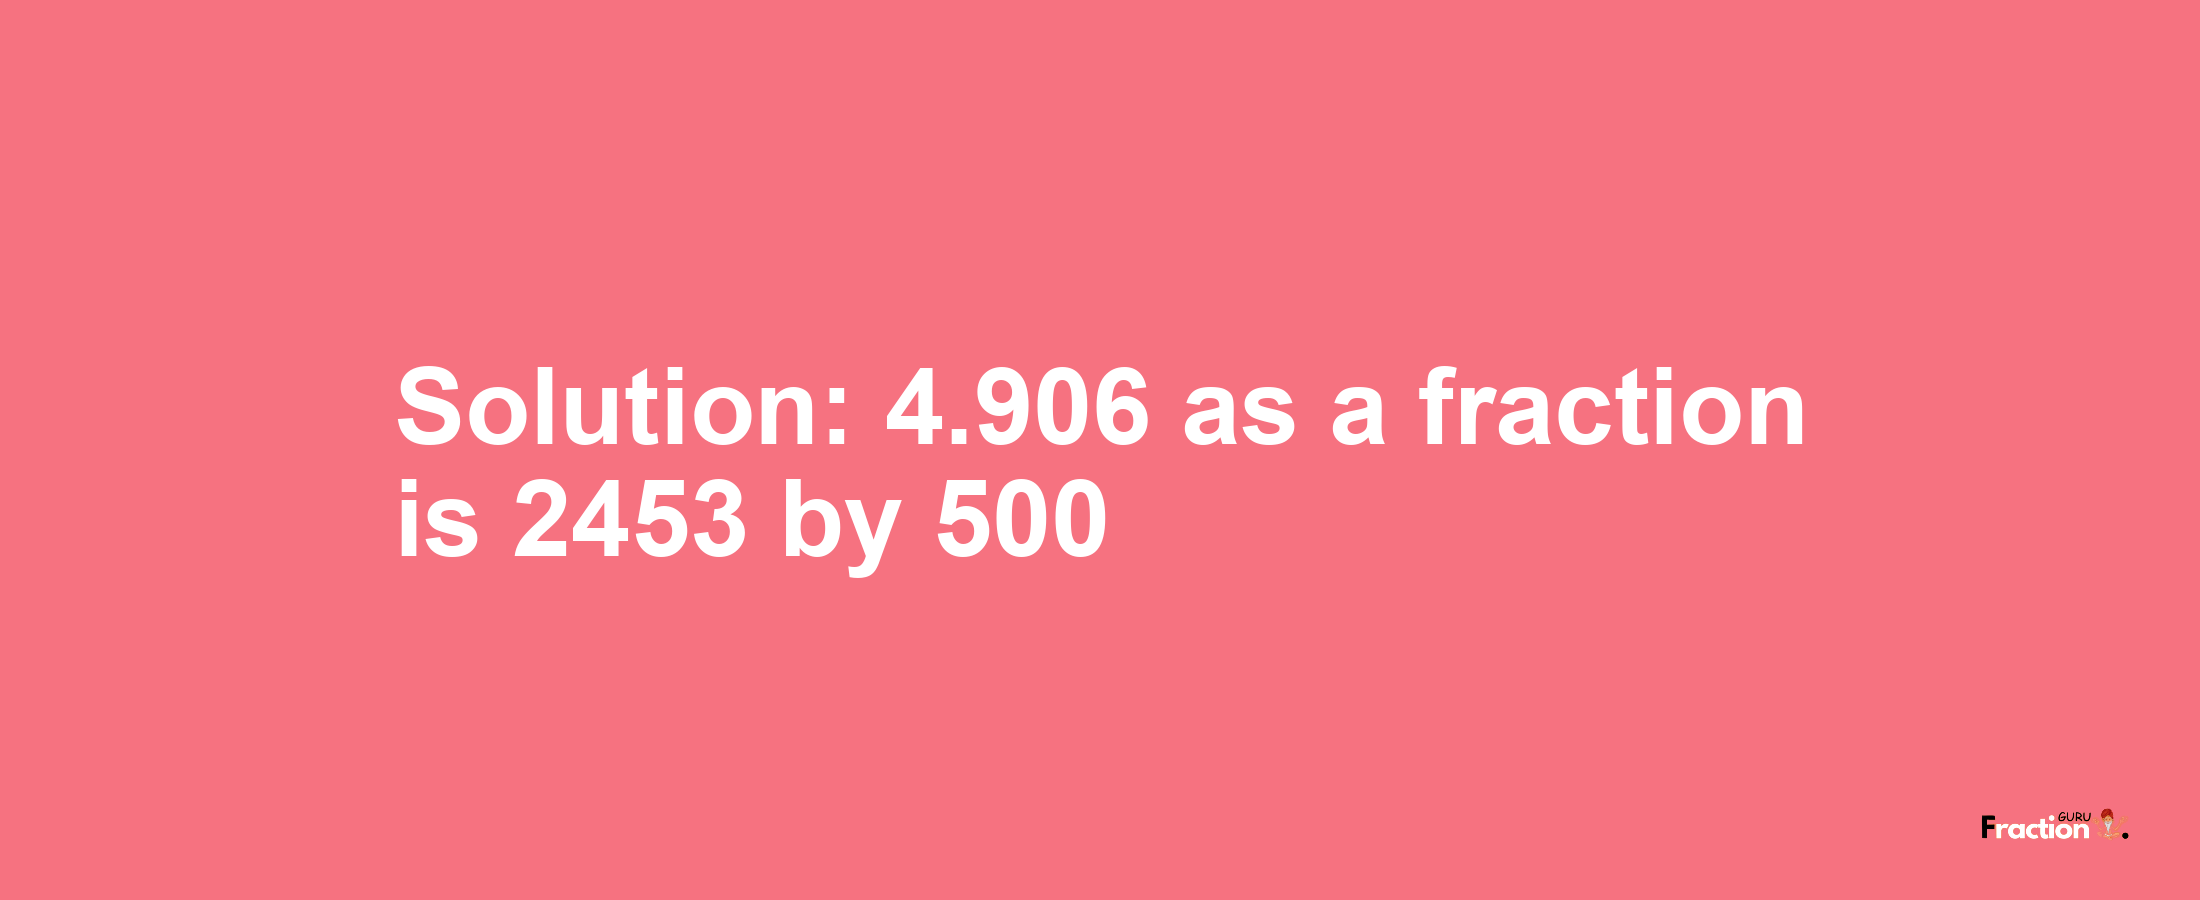 Solution:4.906 as a fraction is 2453/500